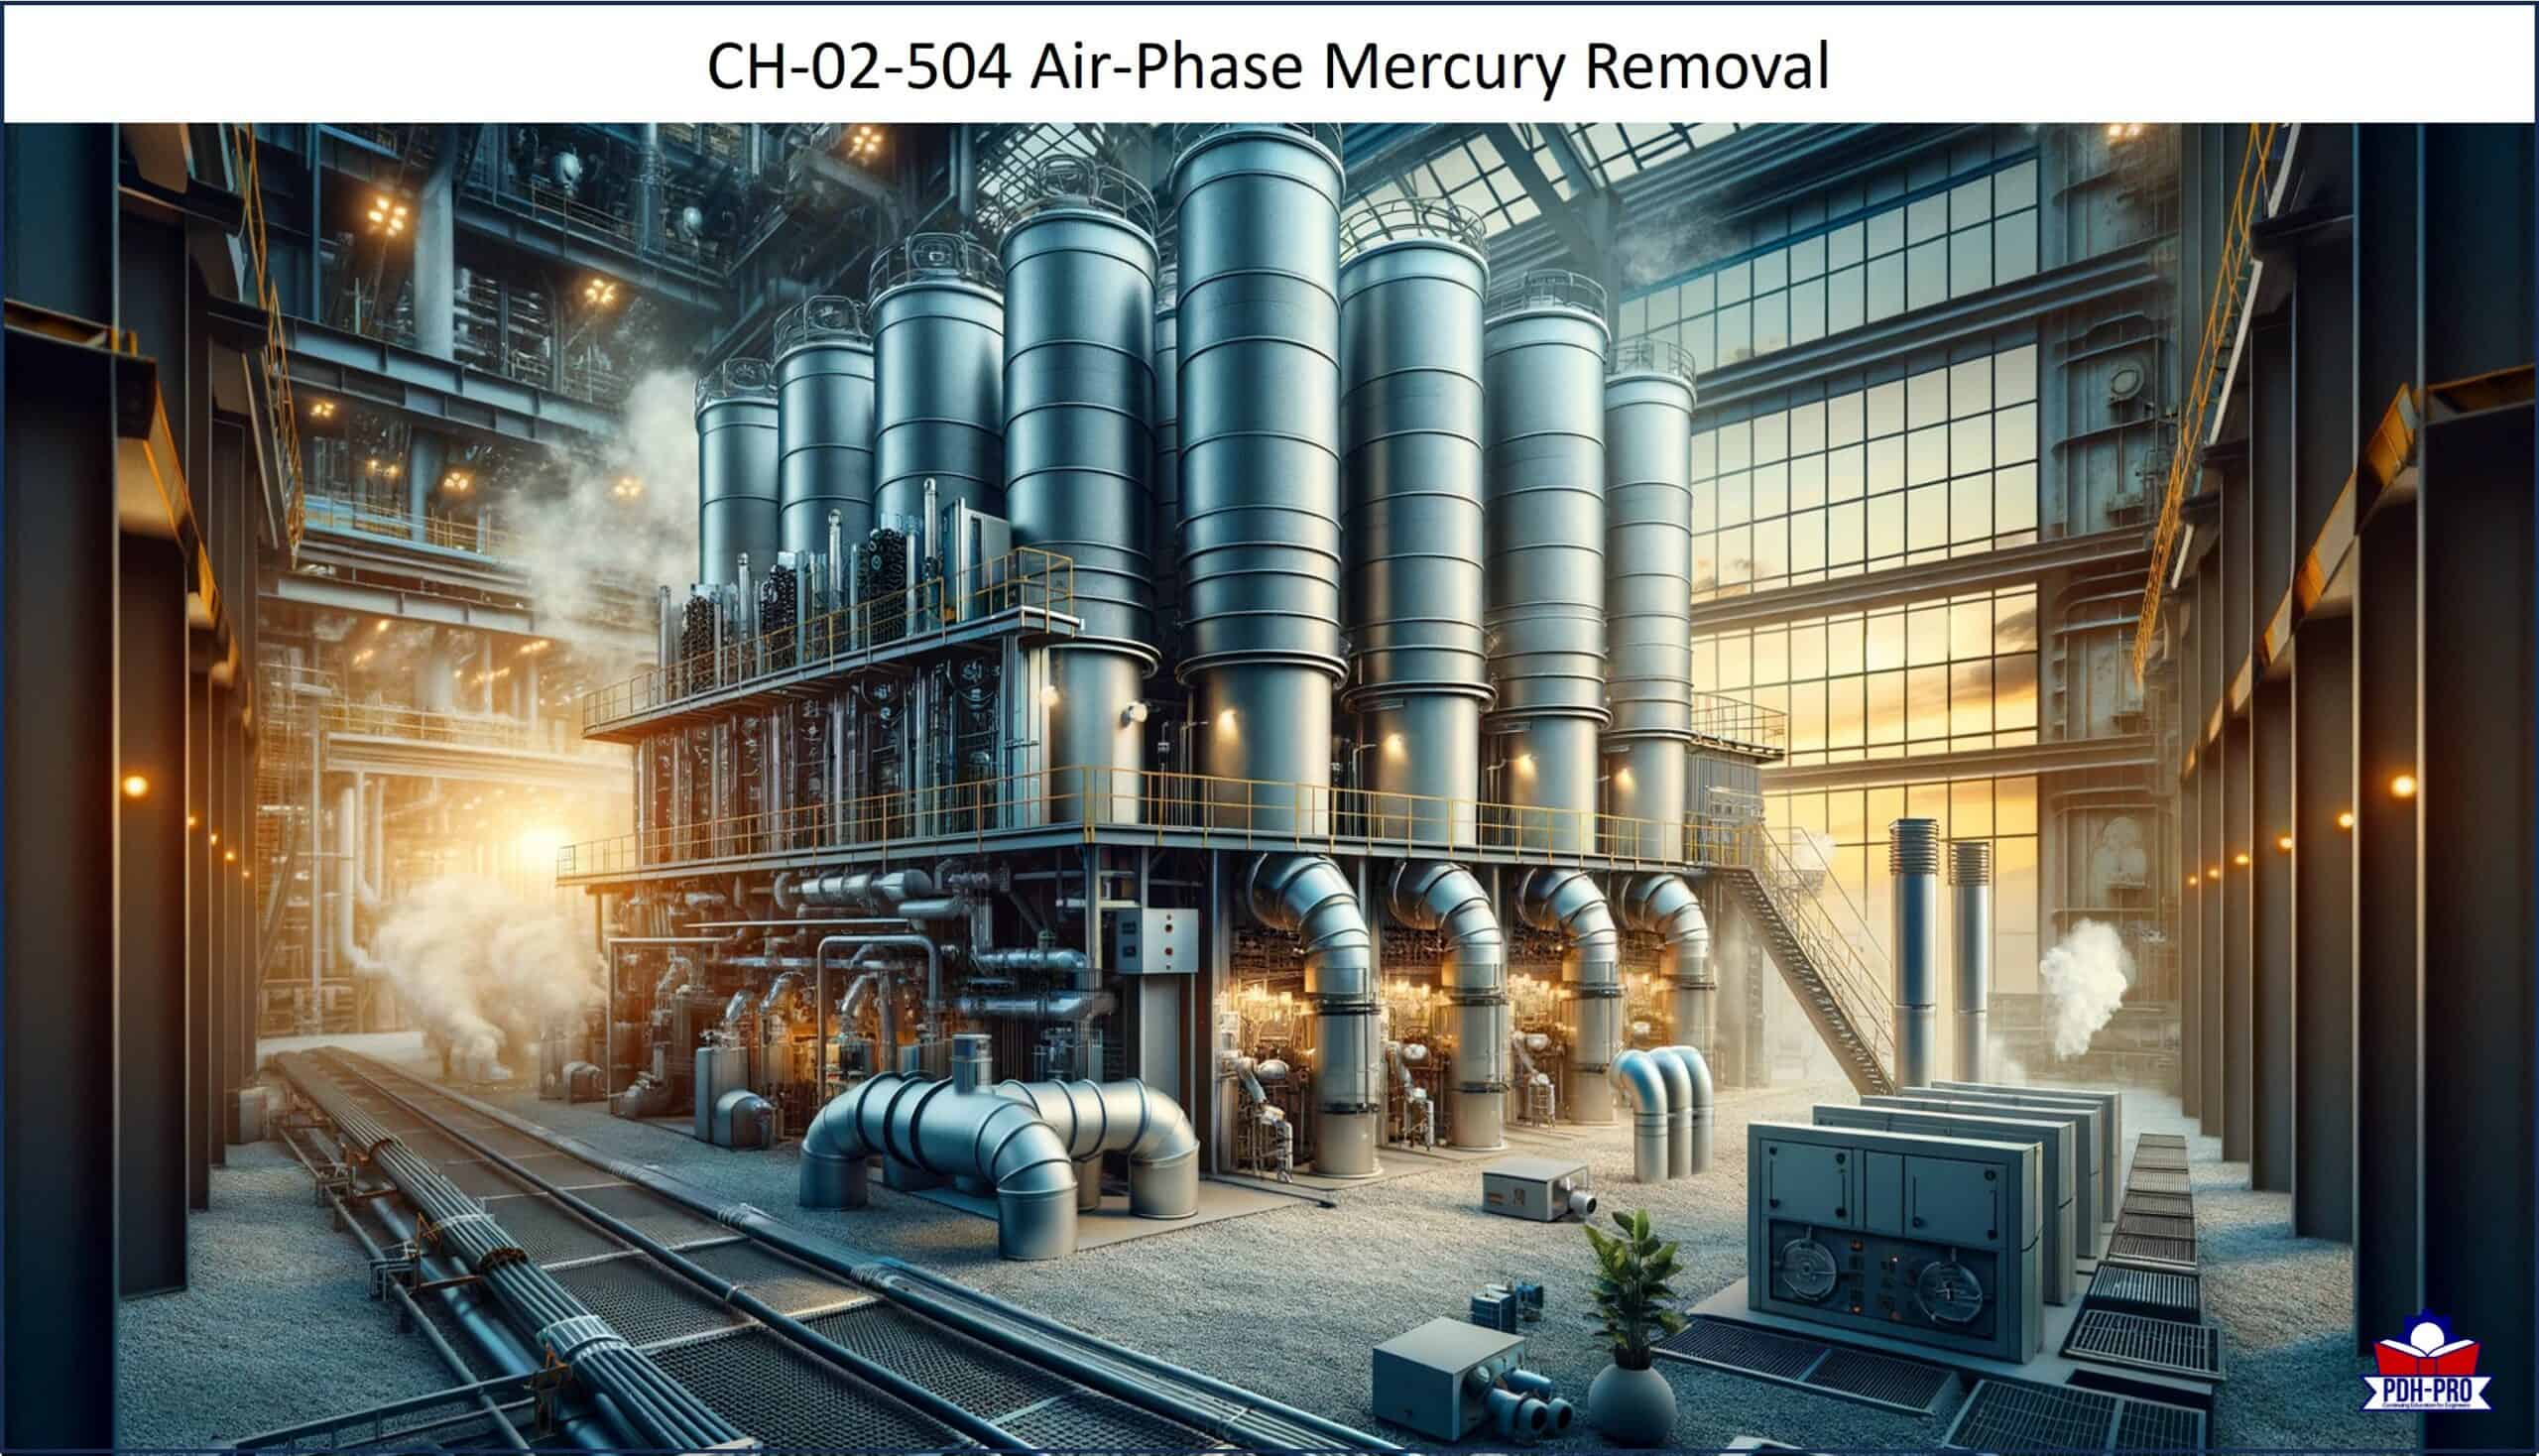 Air-Phase Mercury Removal